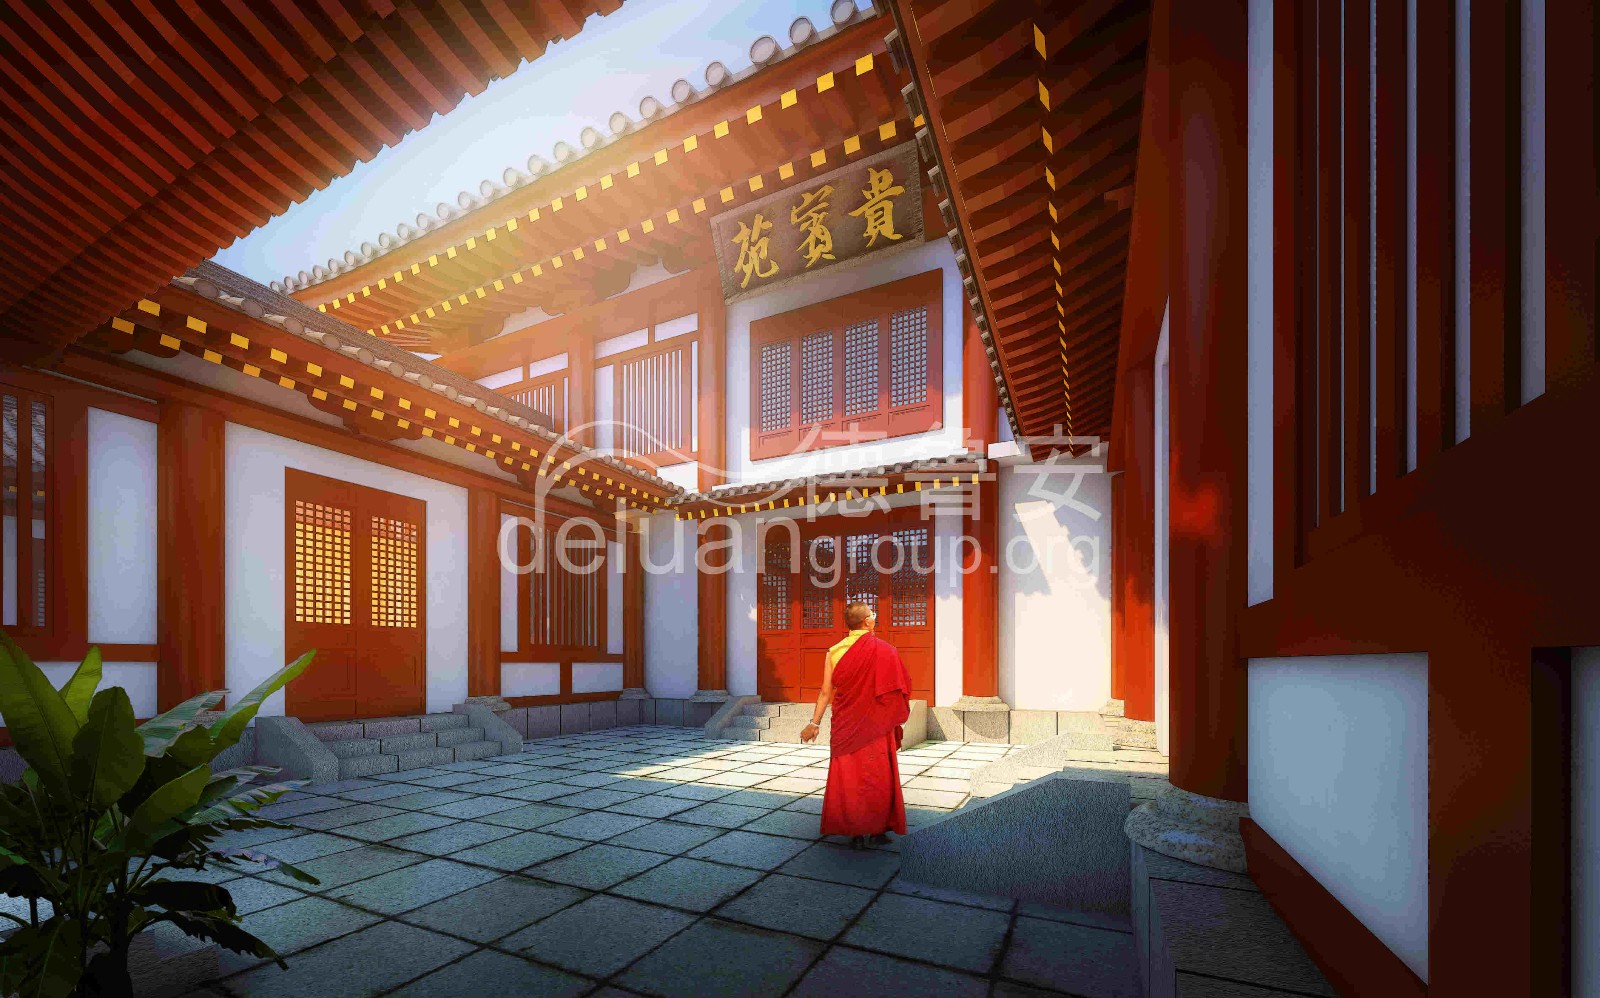 Planning and design of Baoqing temple in Xianghe0(图27)